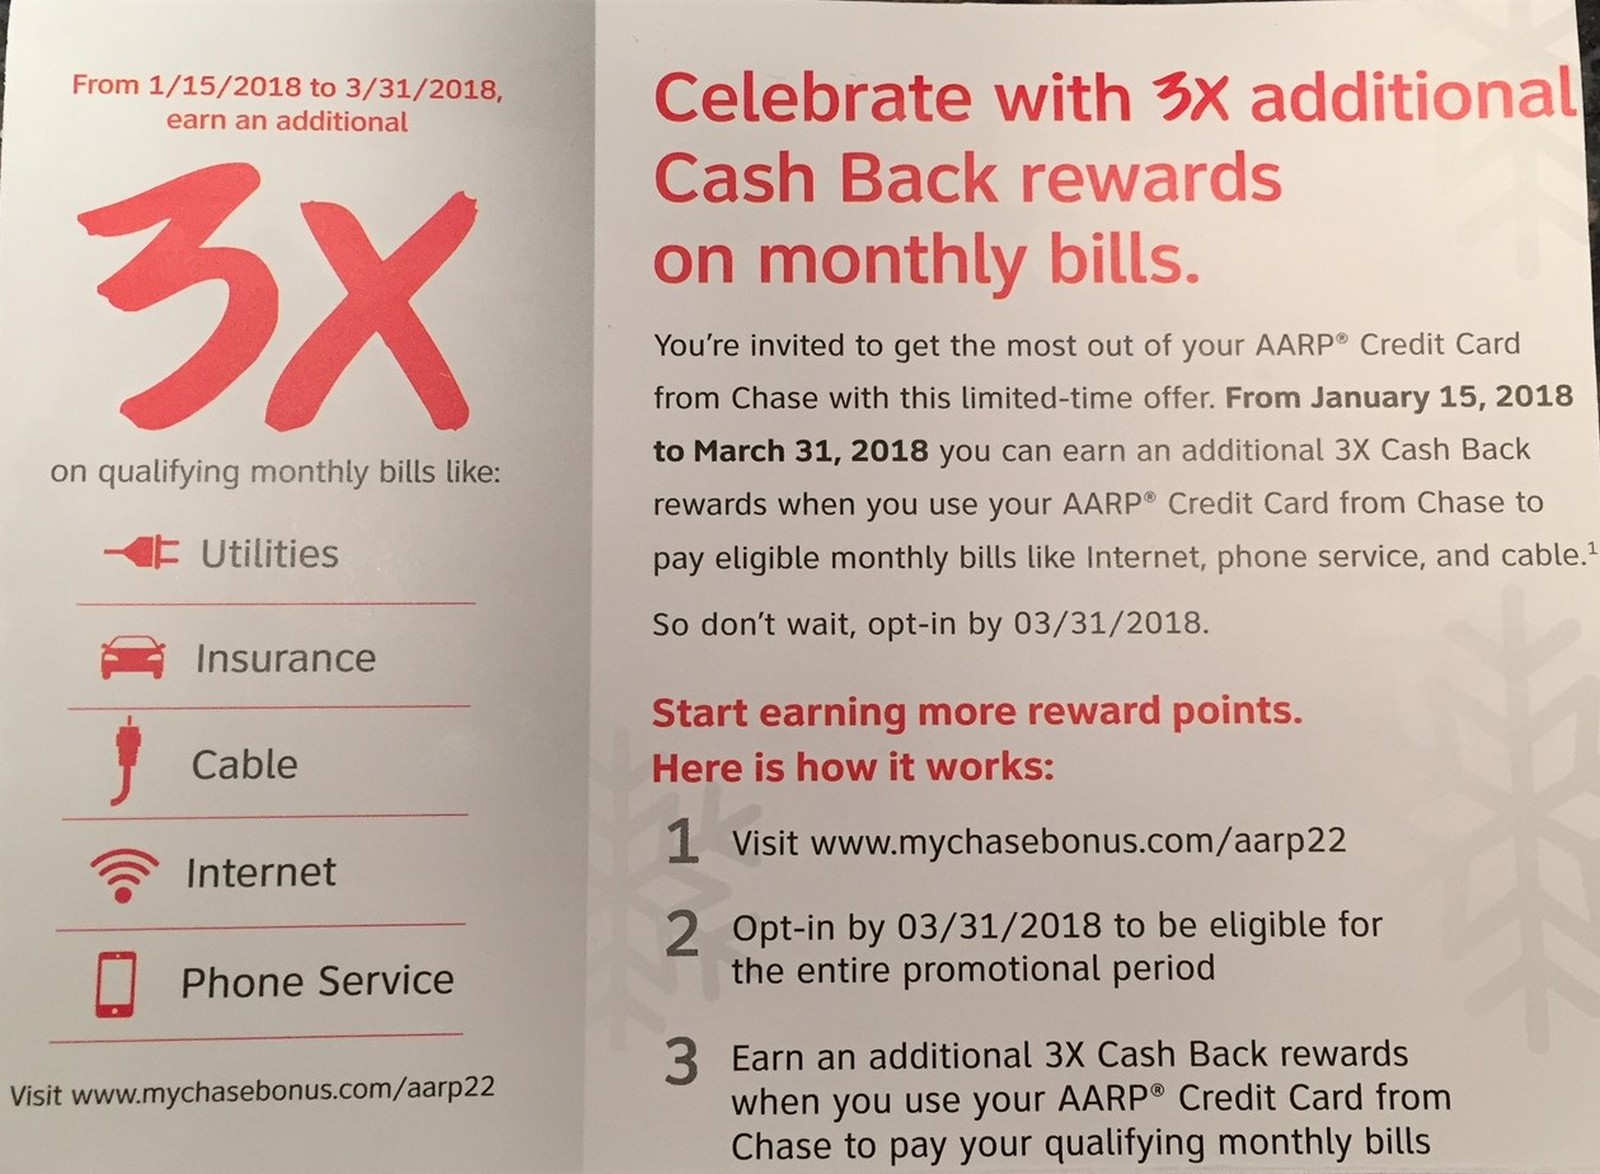 Chase Sends Out Chase AARP Spending Offers